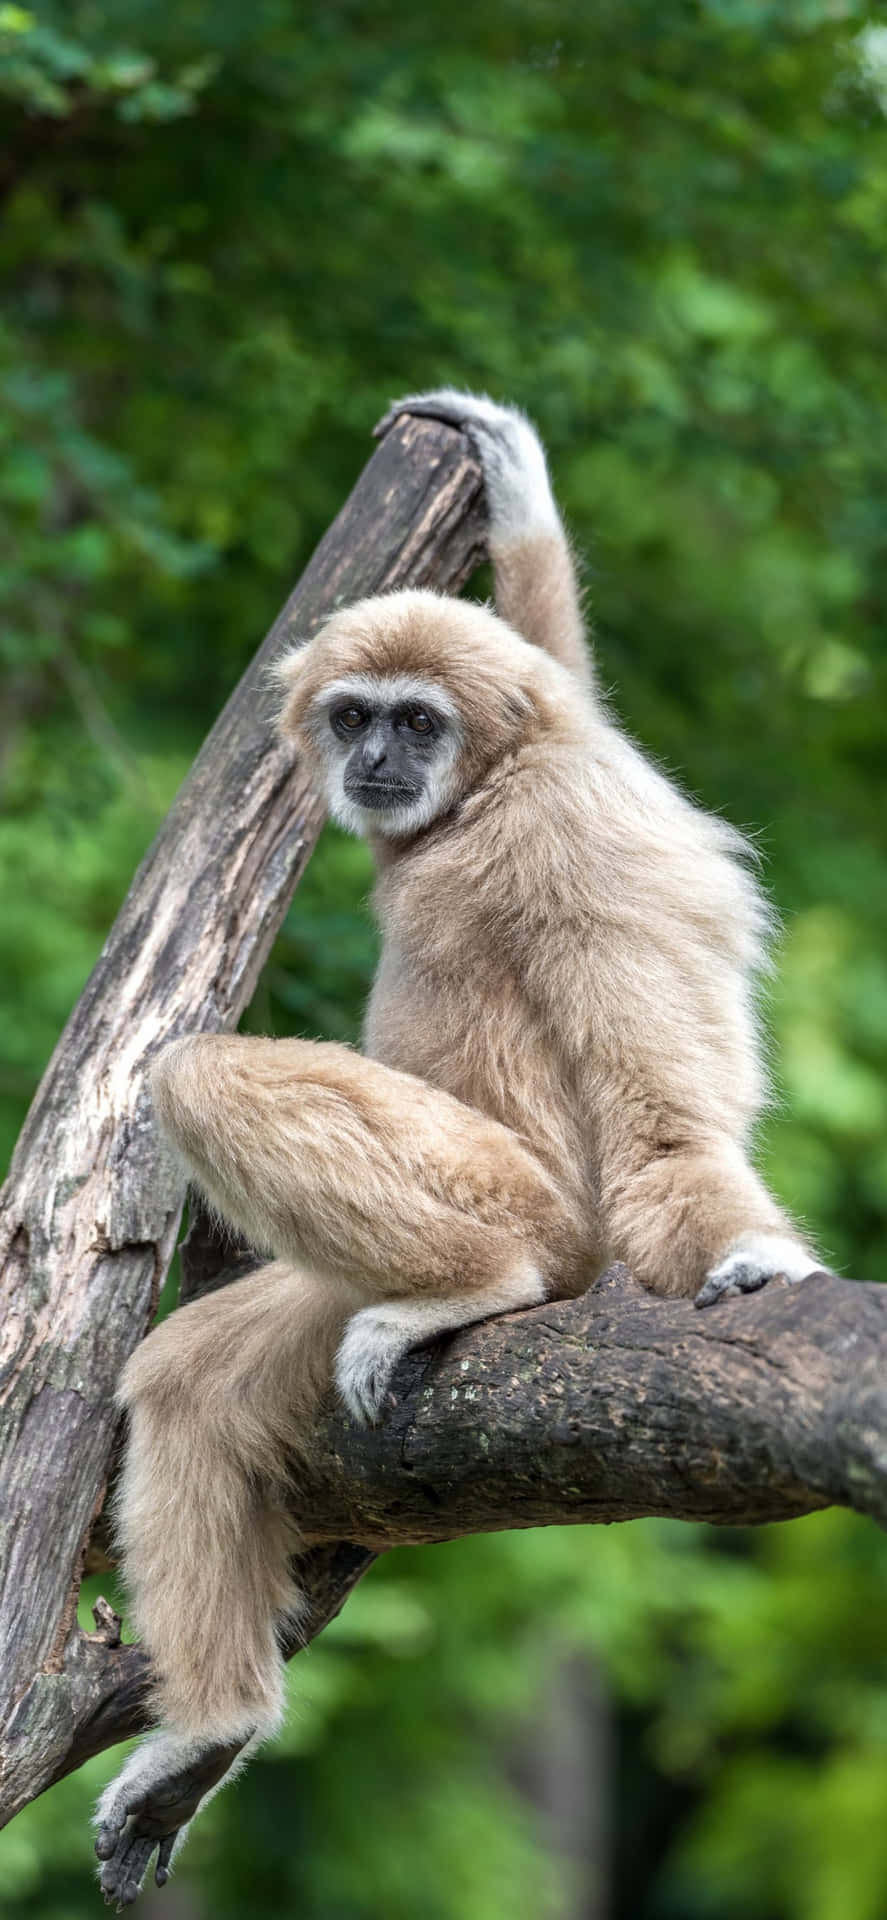 Get explosive color and clarity with the Apple iPhone Xs Max Gibbon background